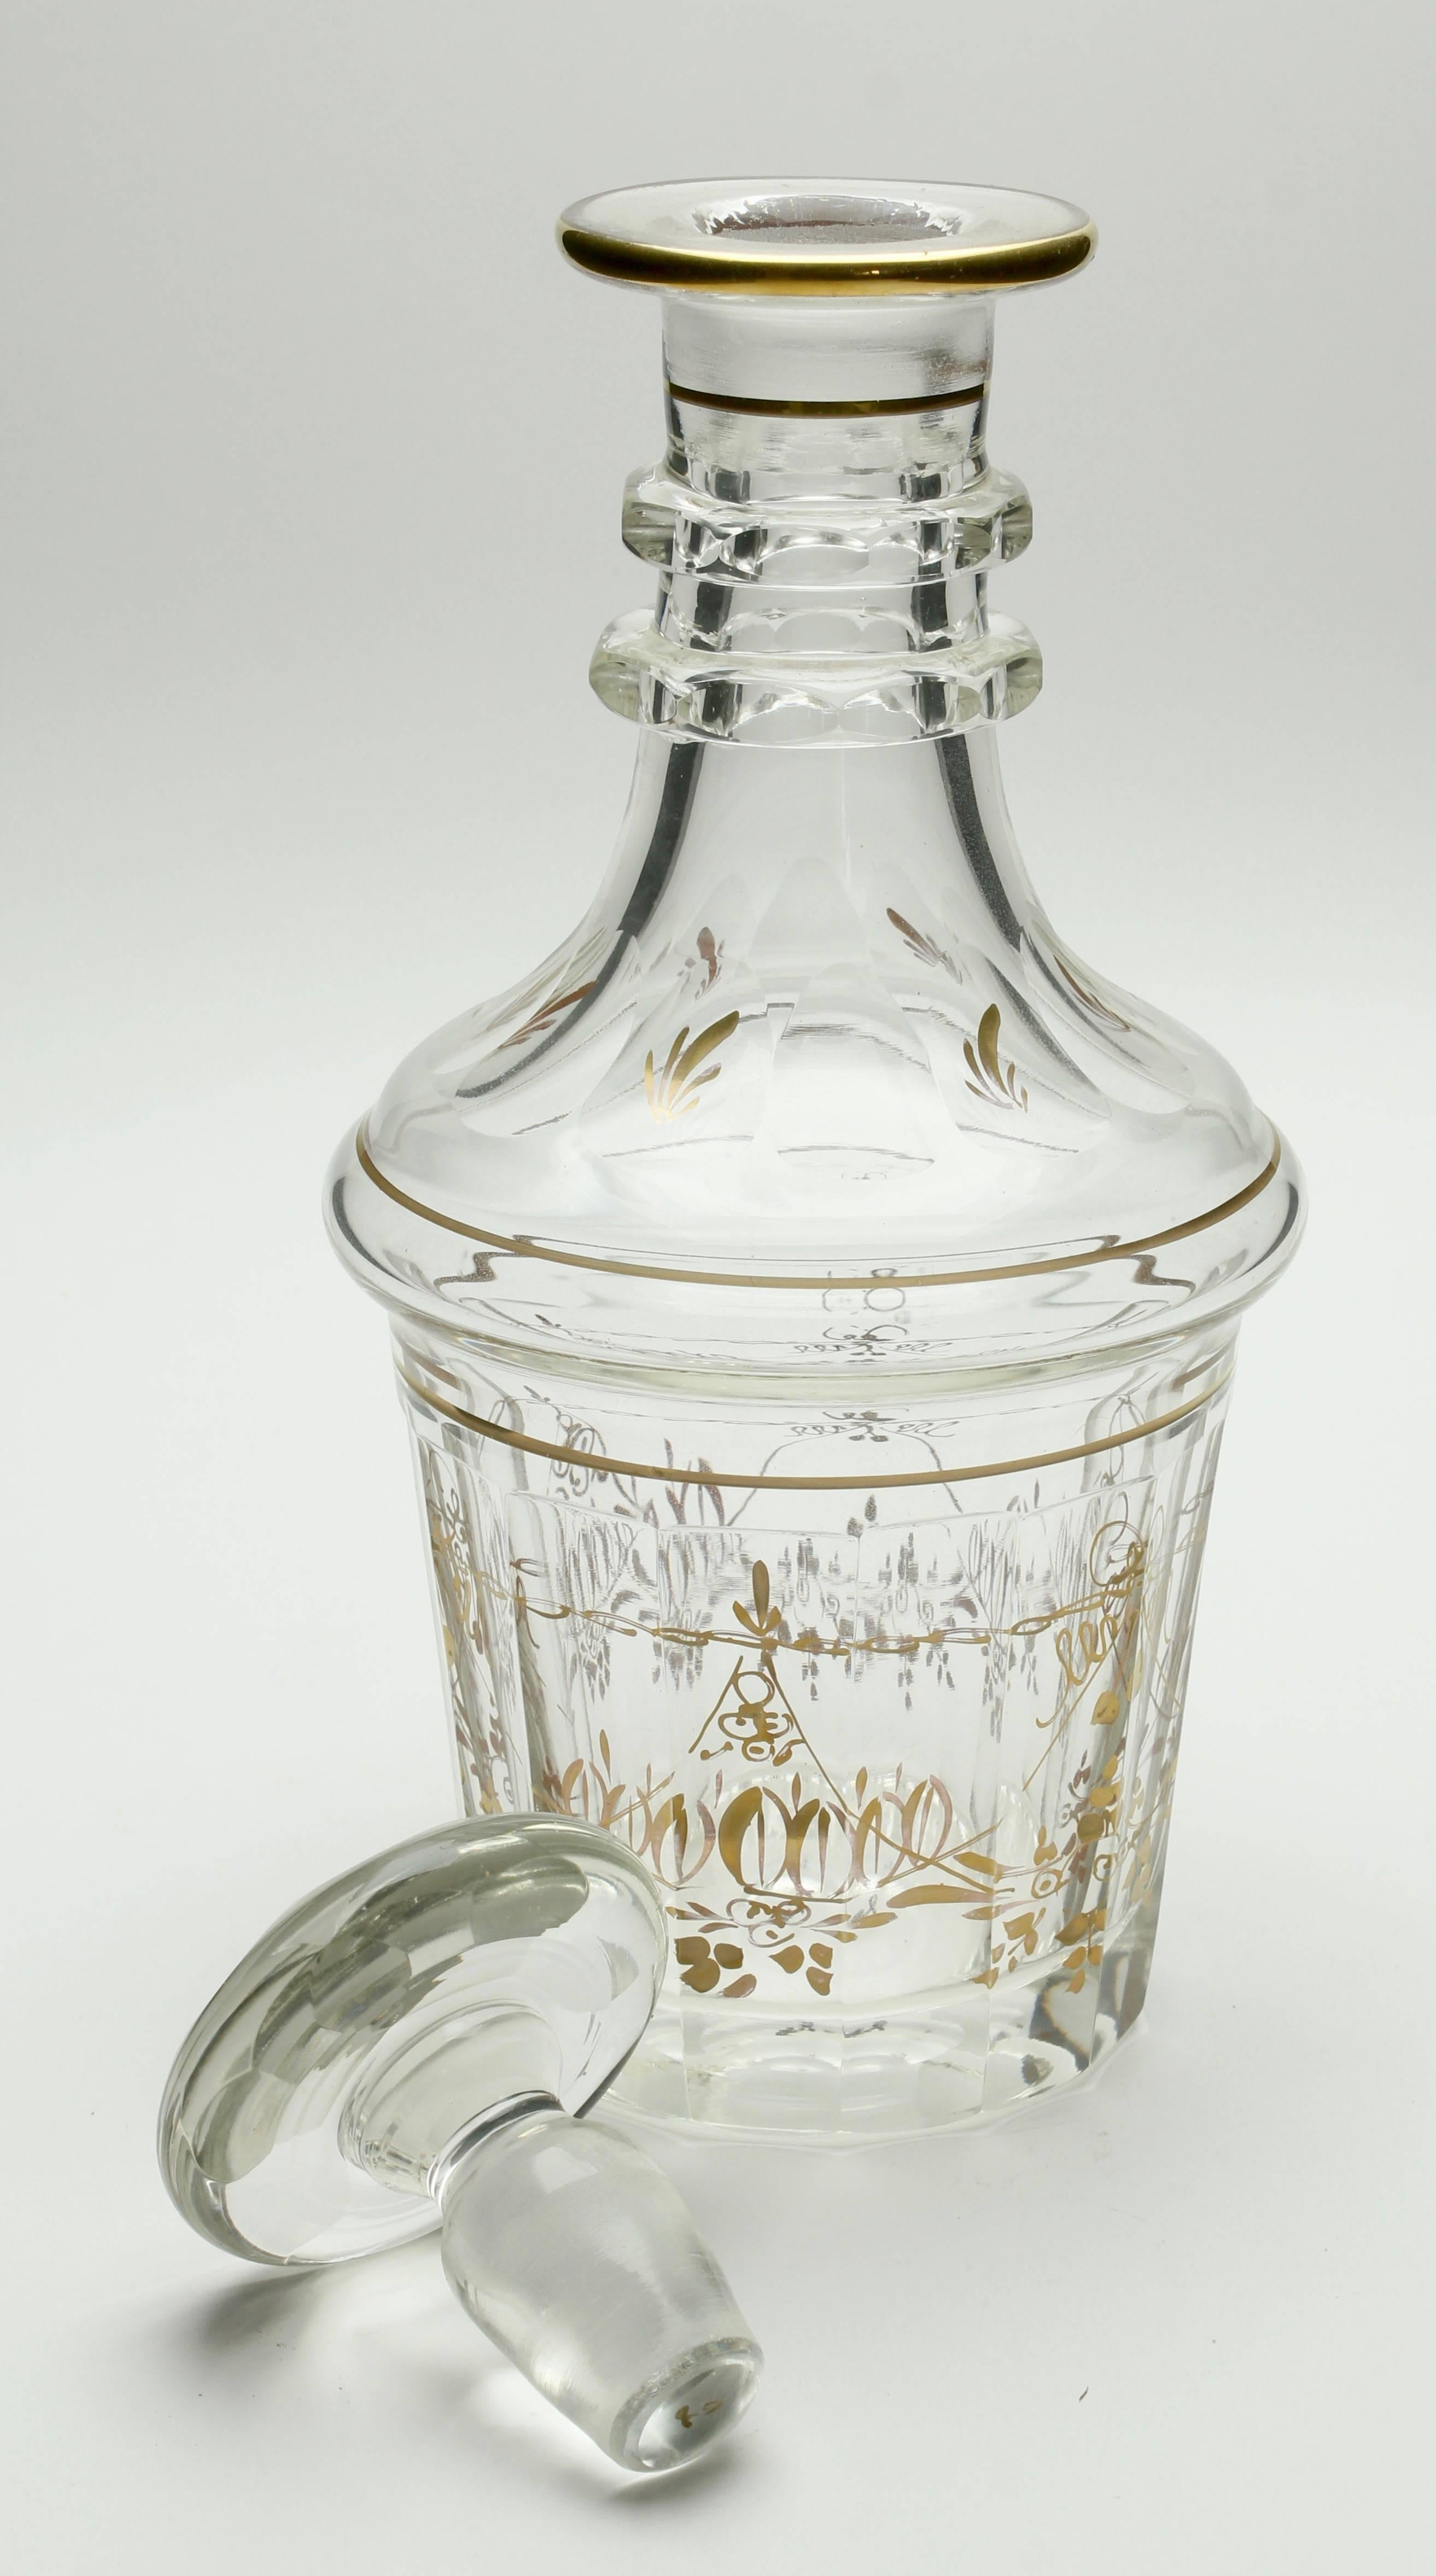 Georgian glass decanter, two neck rings, with gold decoration, 1840s
The piece is in excellent condition and a real beauty!
Attributed to Baccarat
There was a lot of craftsmanship and time necessary to make these decanters.



    